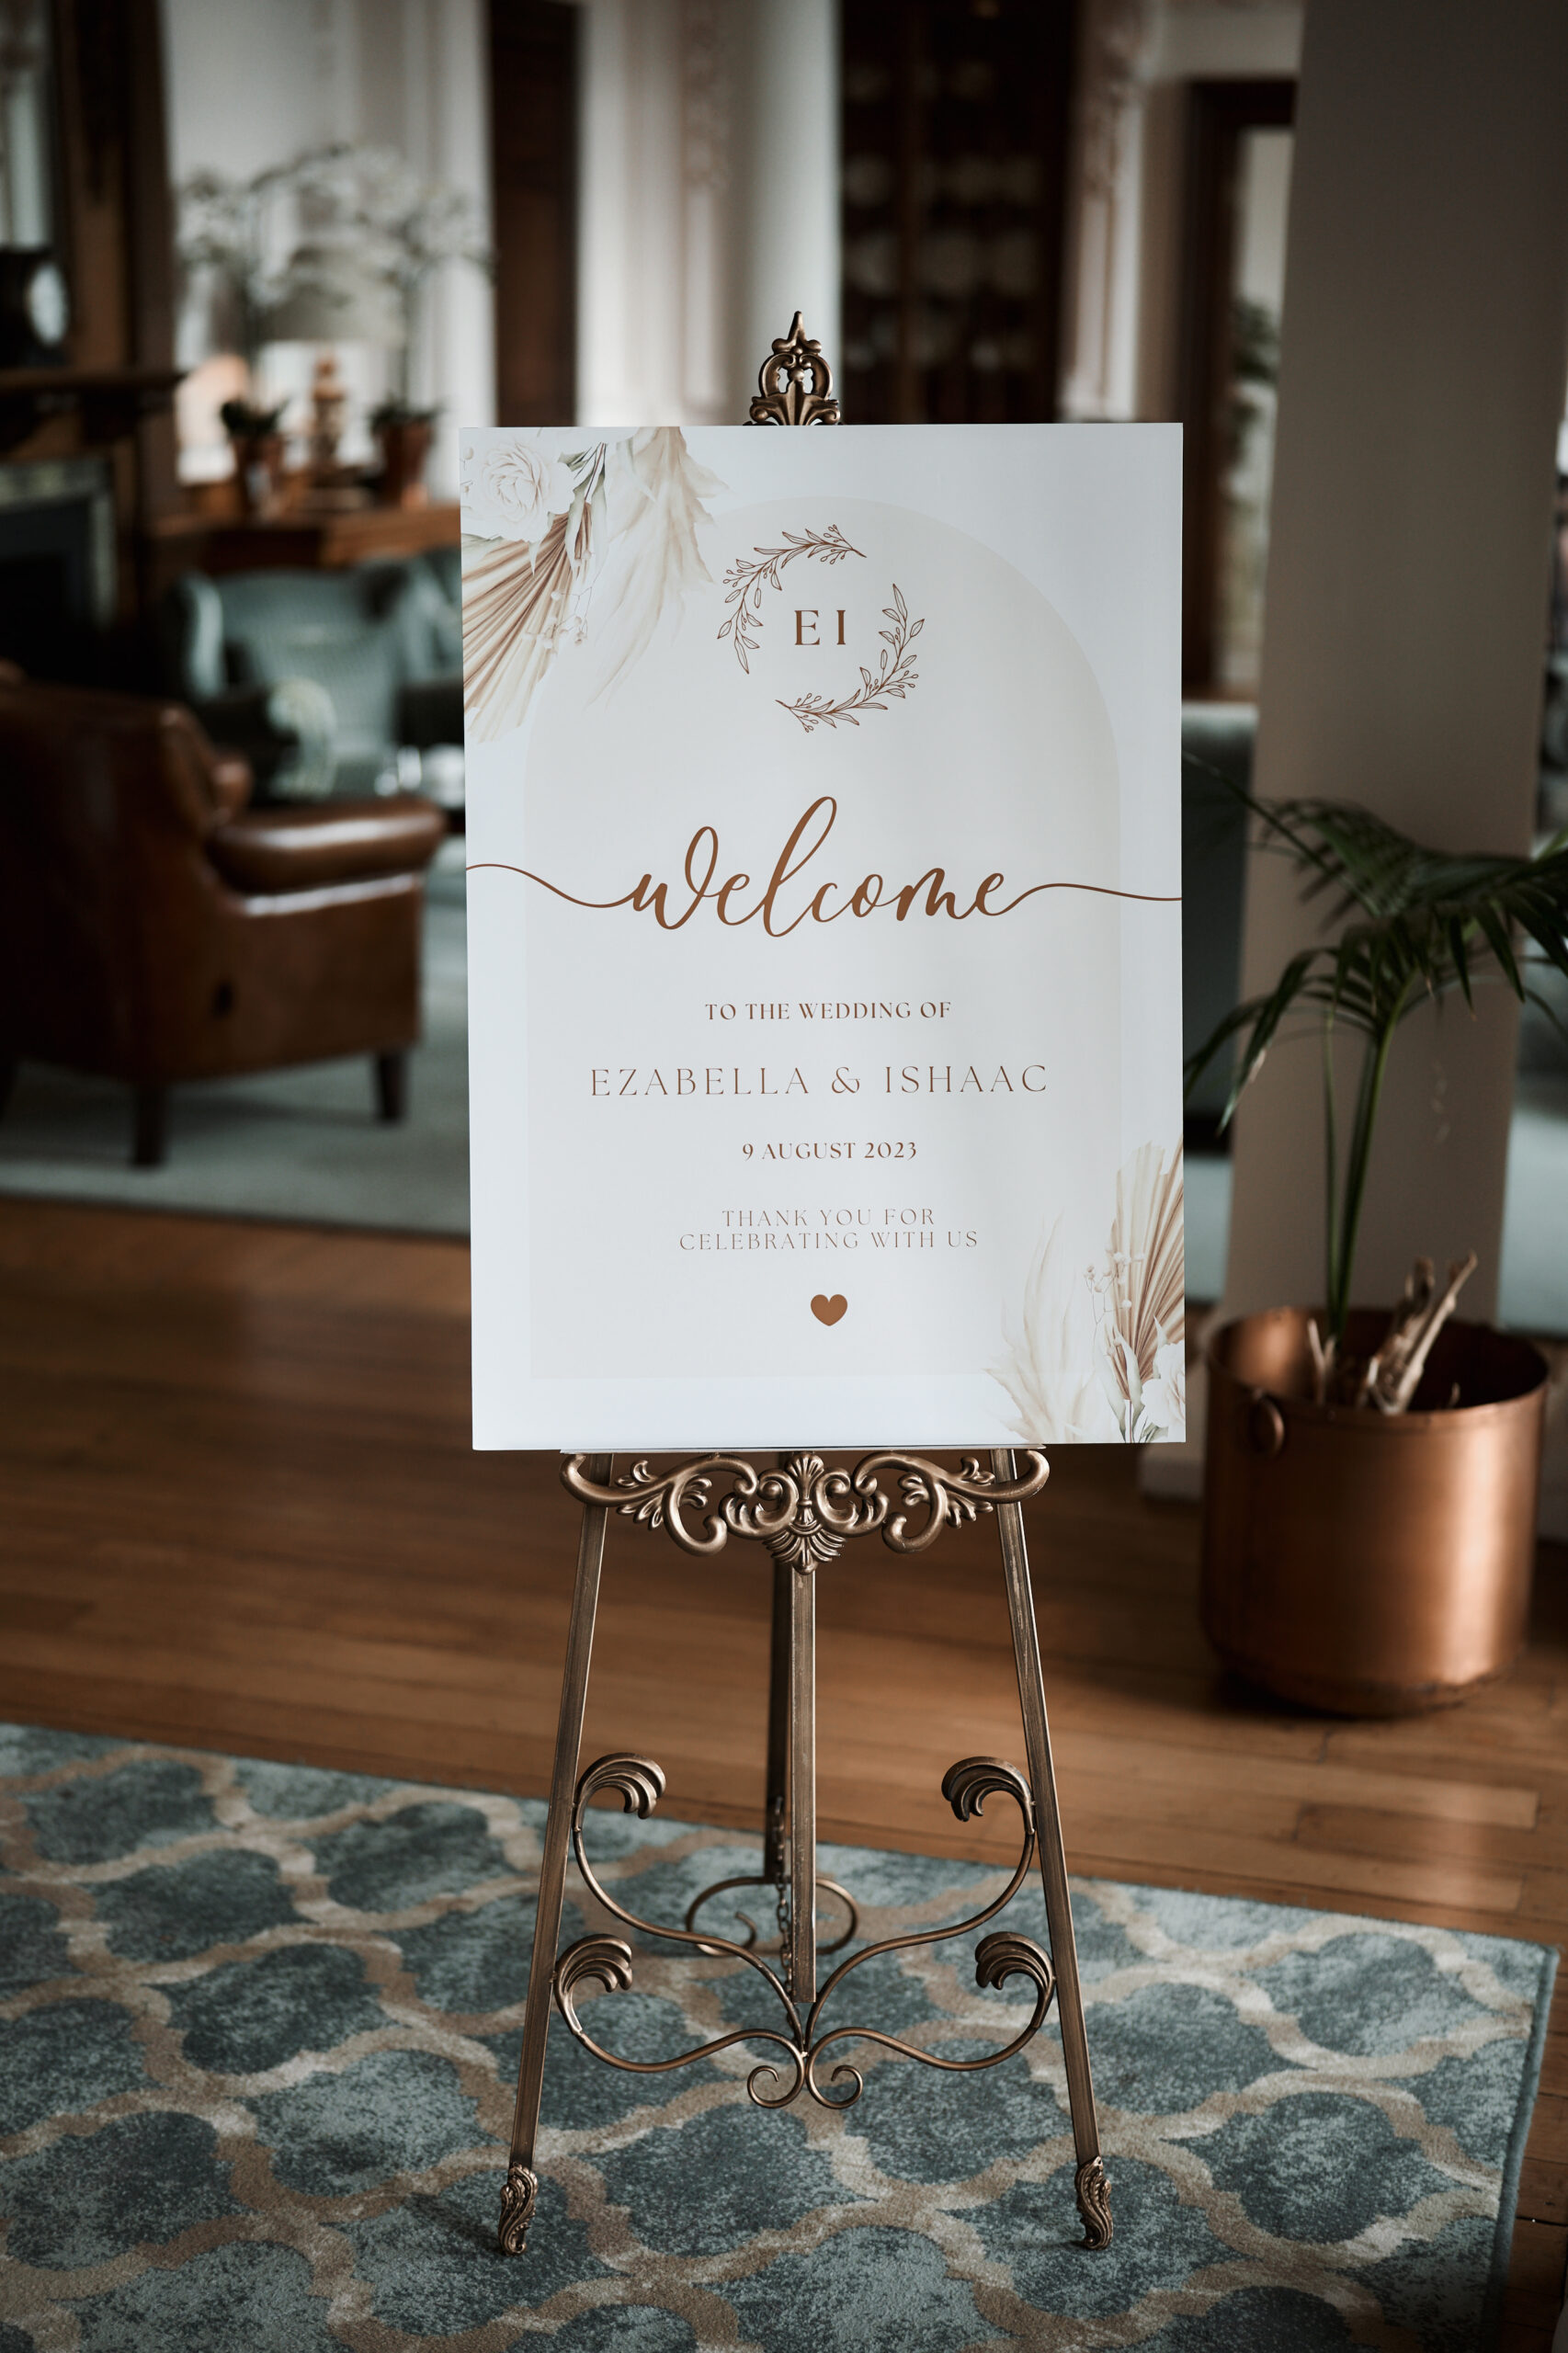 A welcome sign is propped up on a stand in the living room.